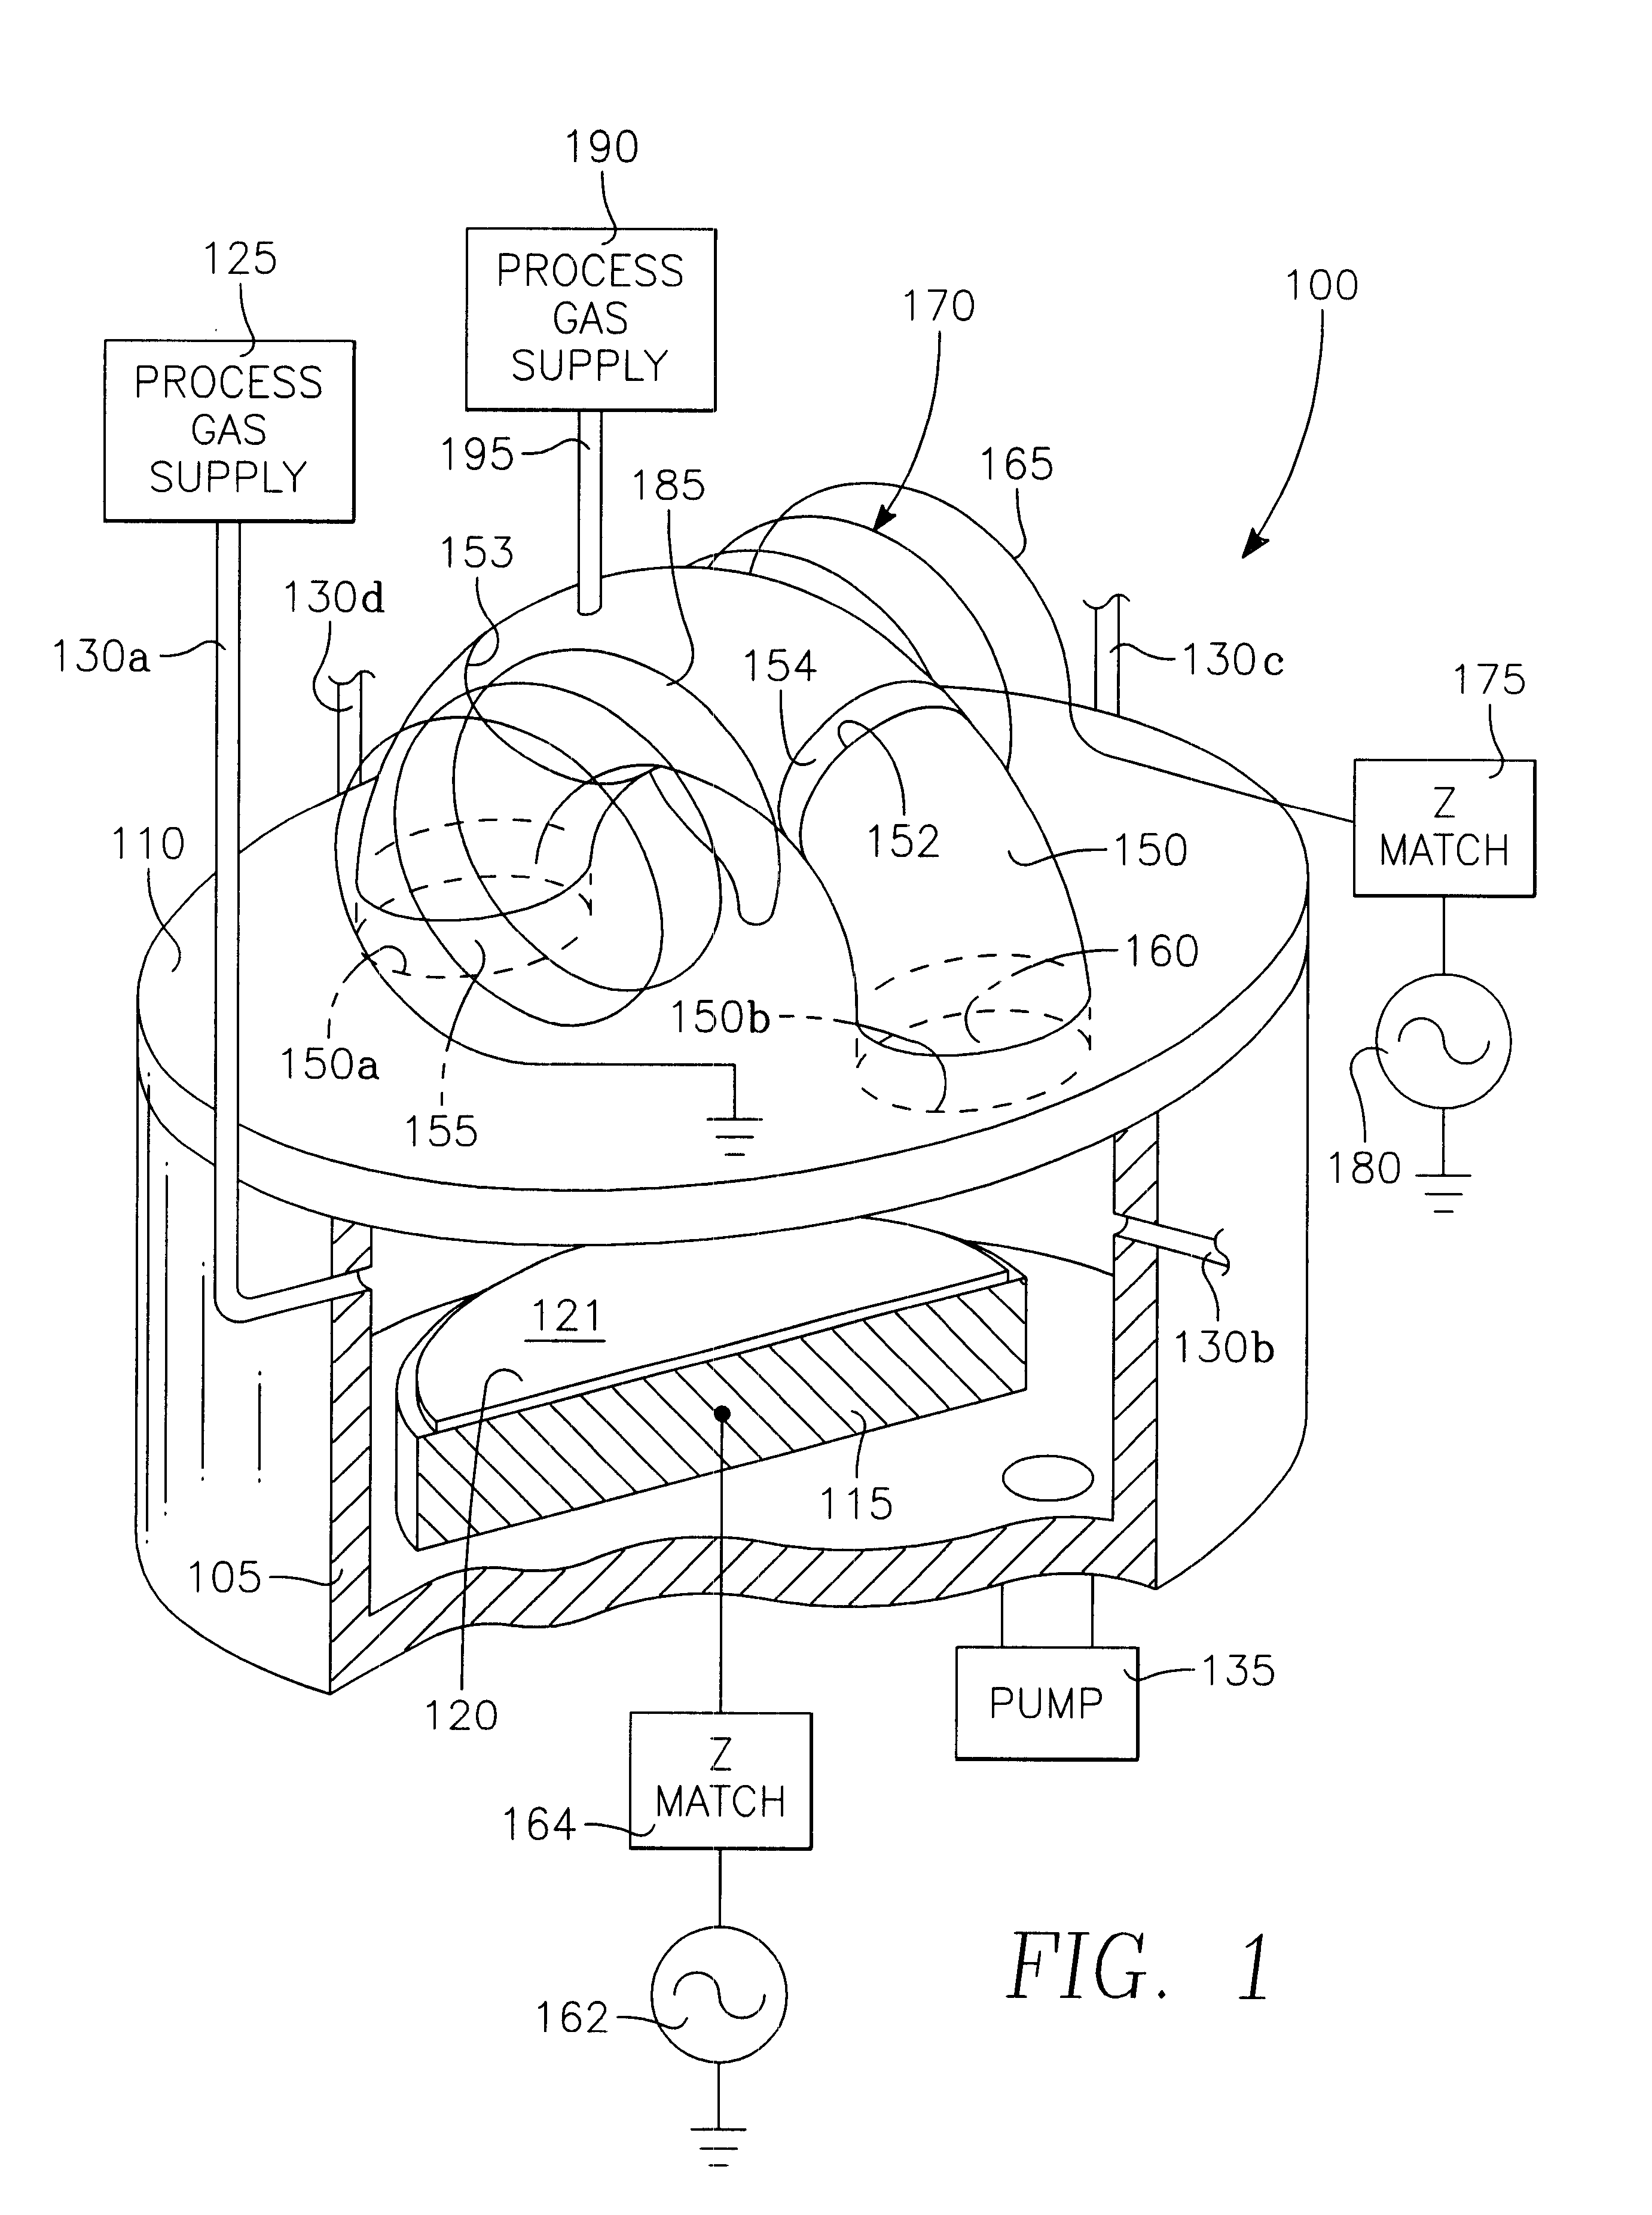 Externally excited torroidal plasma source using a gas distribution plate